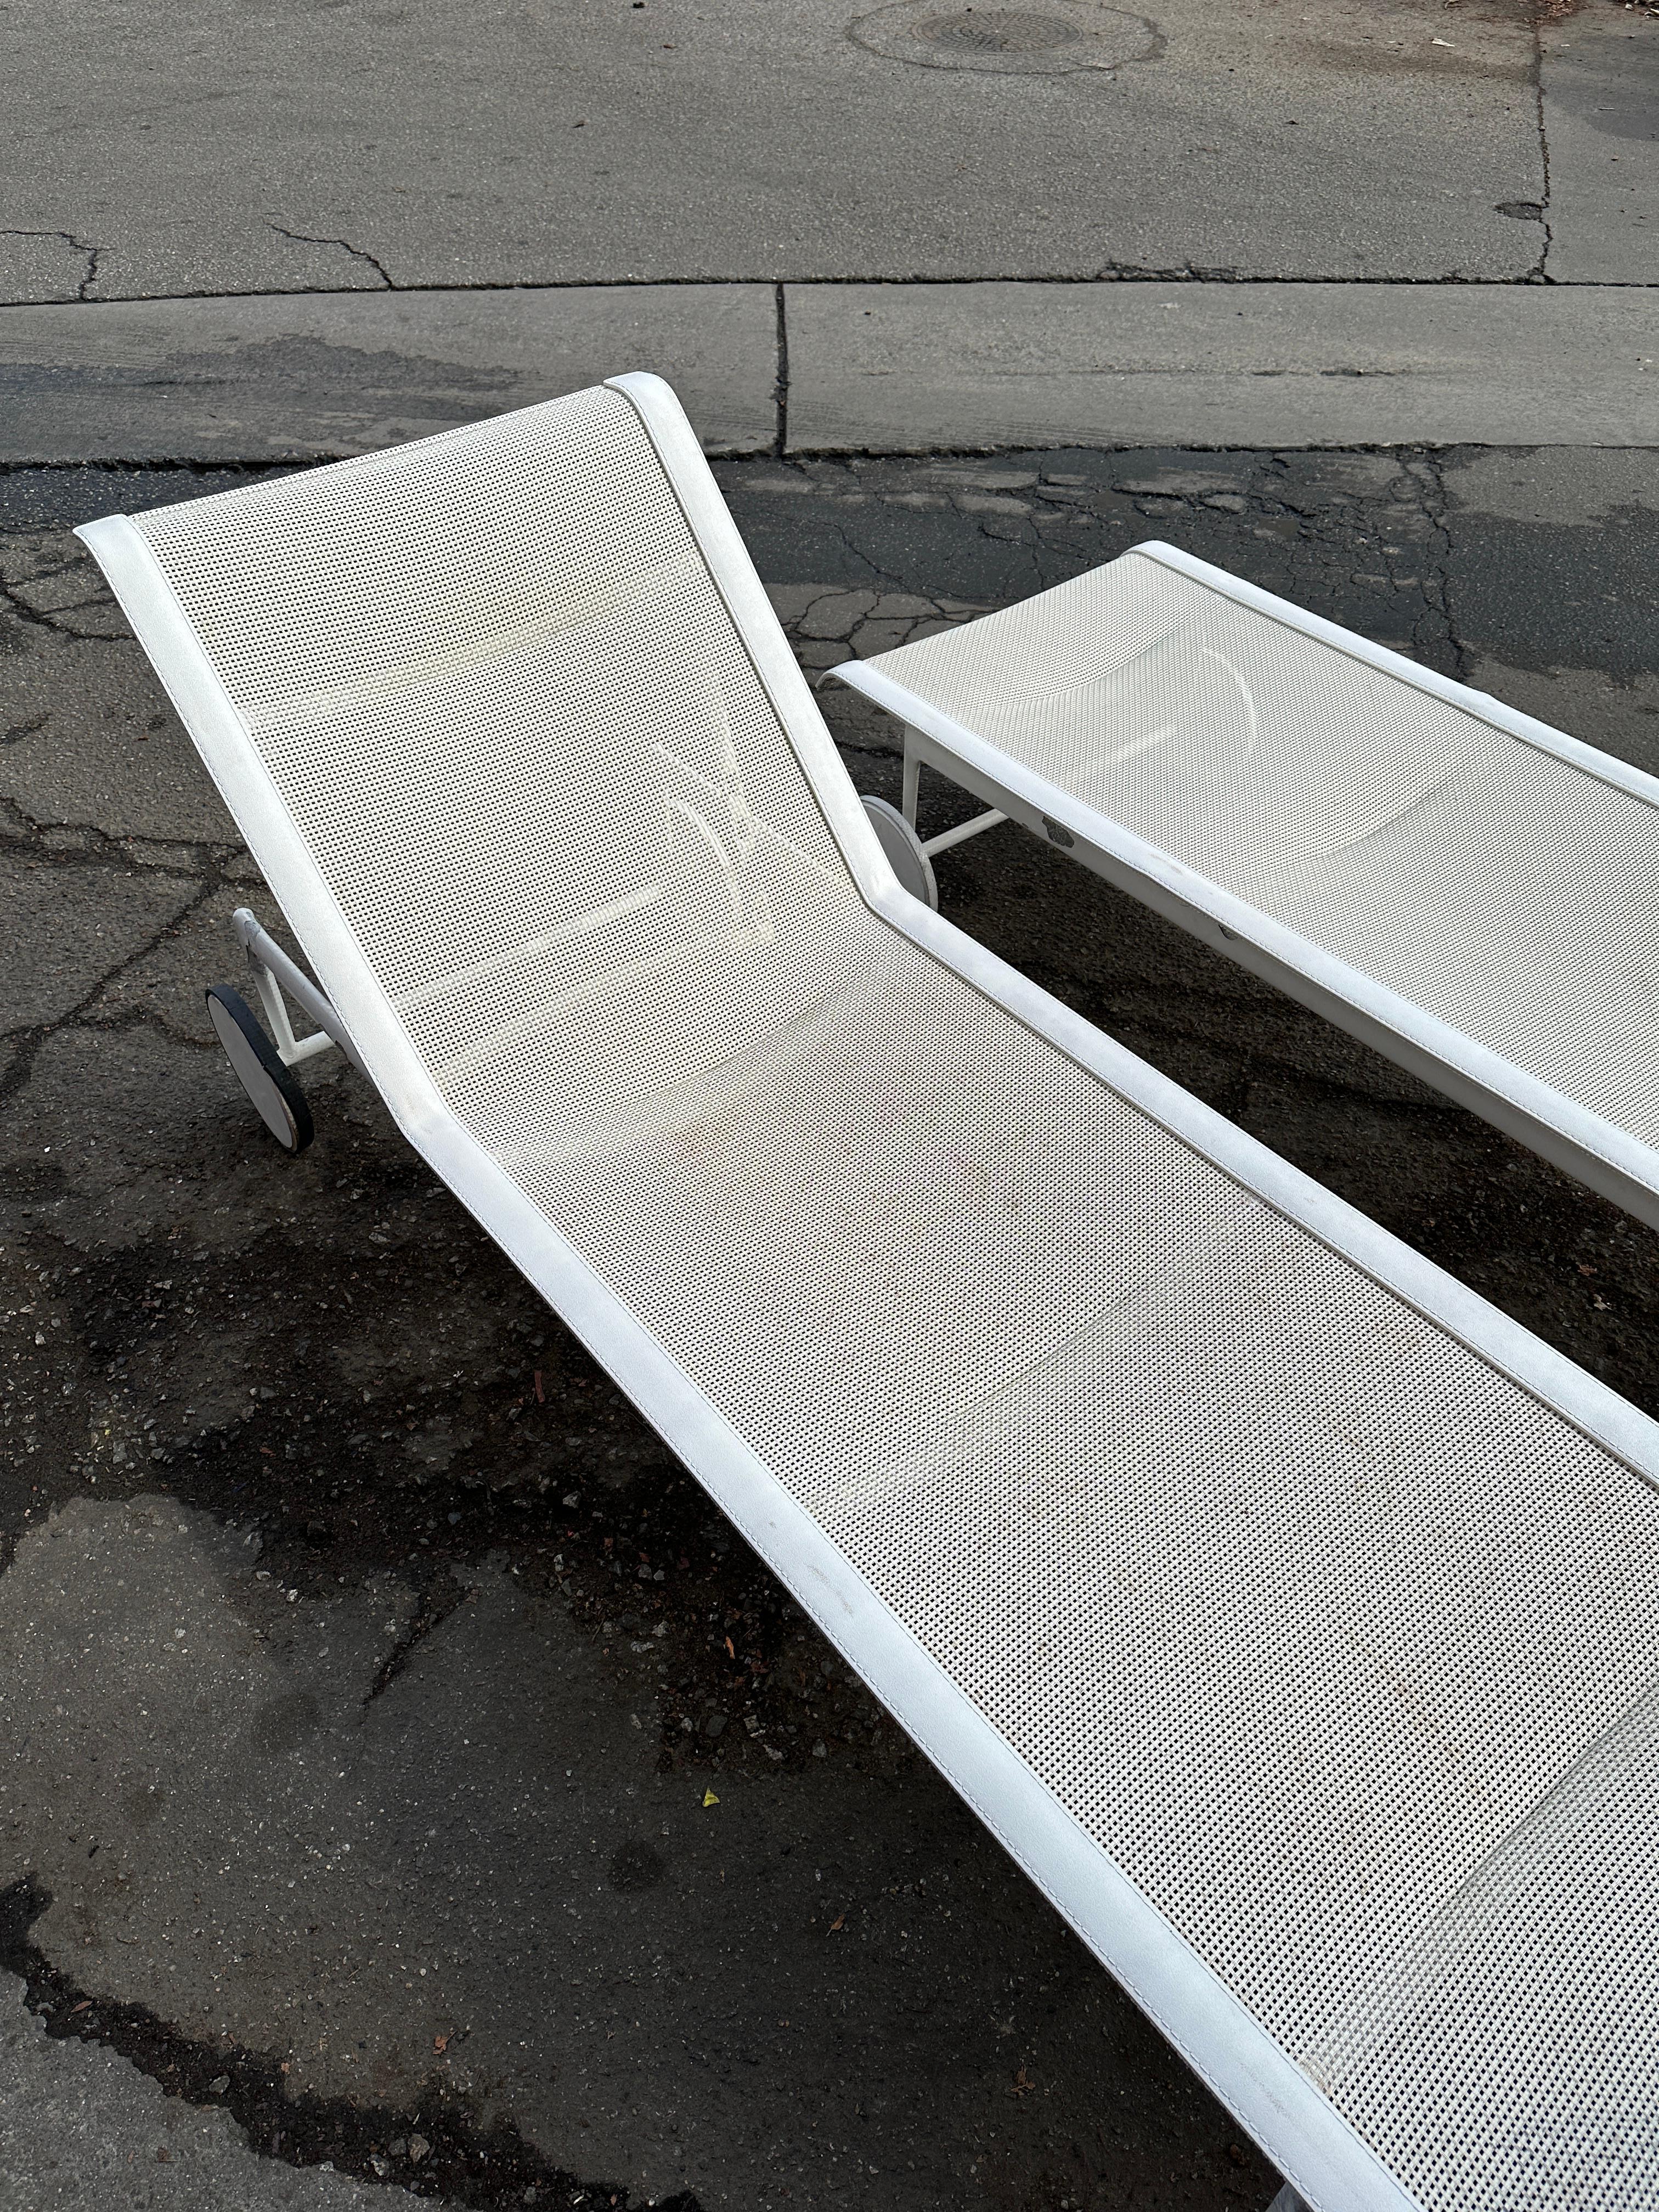 Listed for sale is a single (two chairs are available but the price listed is for each one) Richard Schultz Designs adjustable chaise lounge chair in white. 
Dimensions: 76”w x 25.25”d x 35”h / 14.25